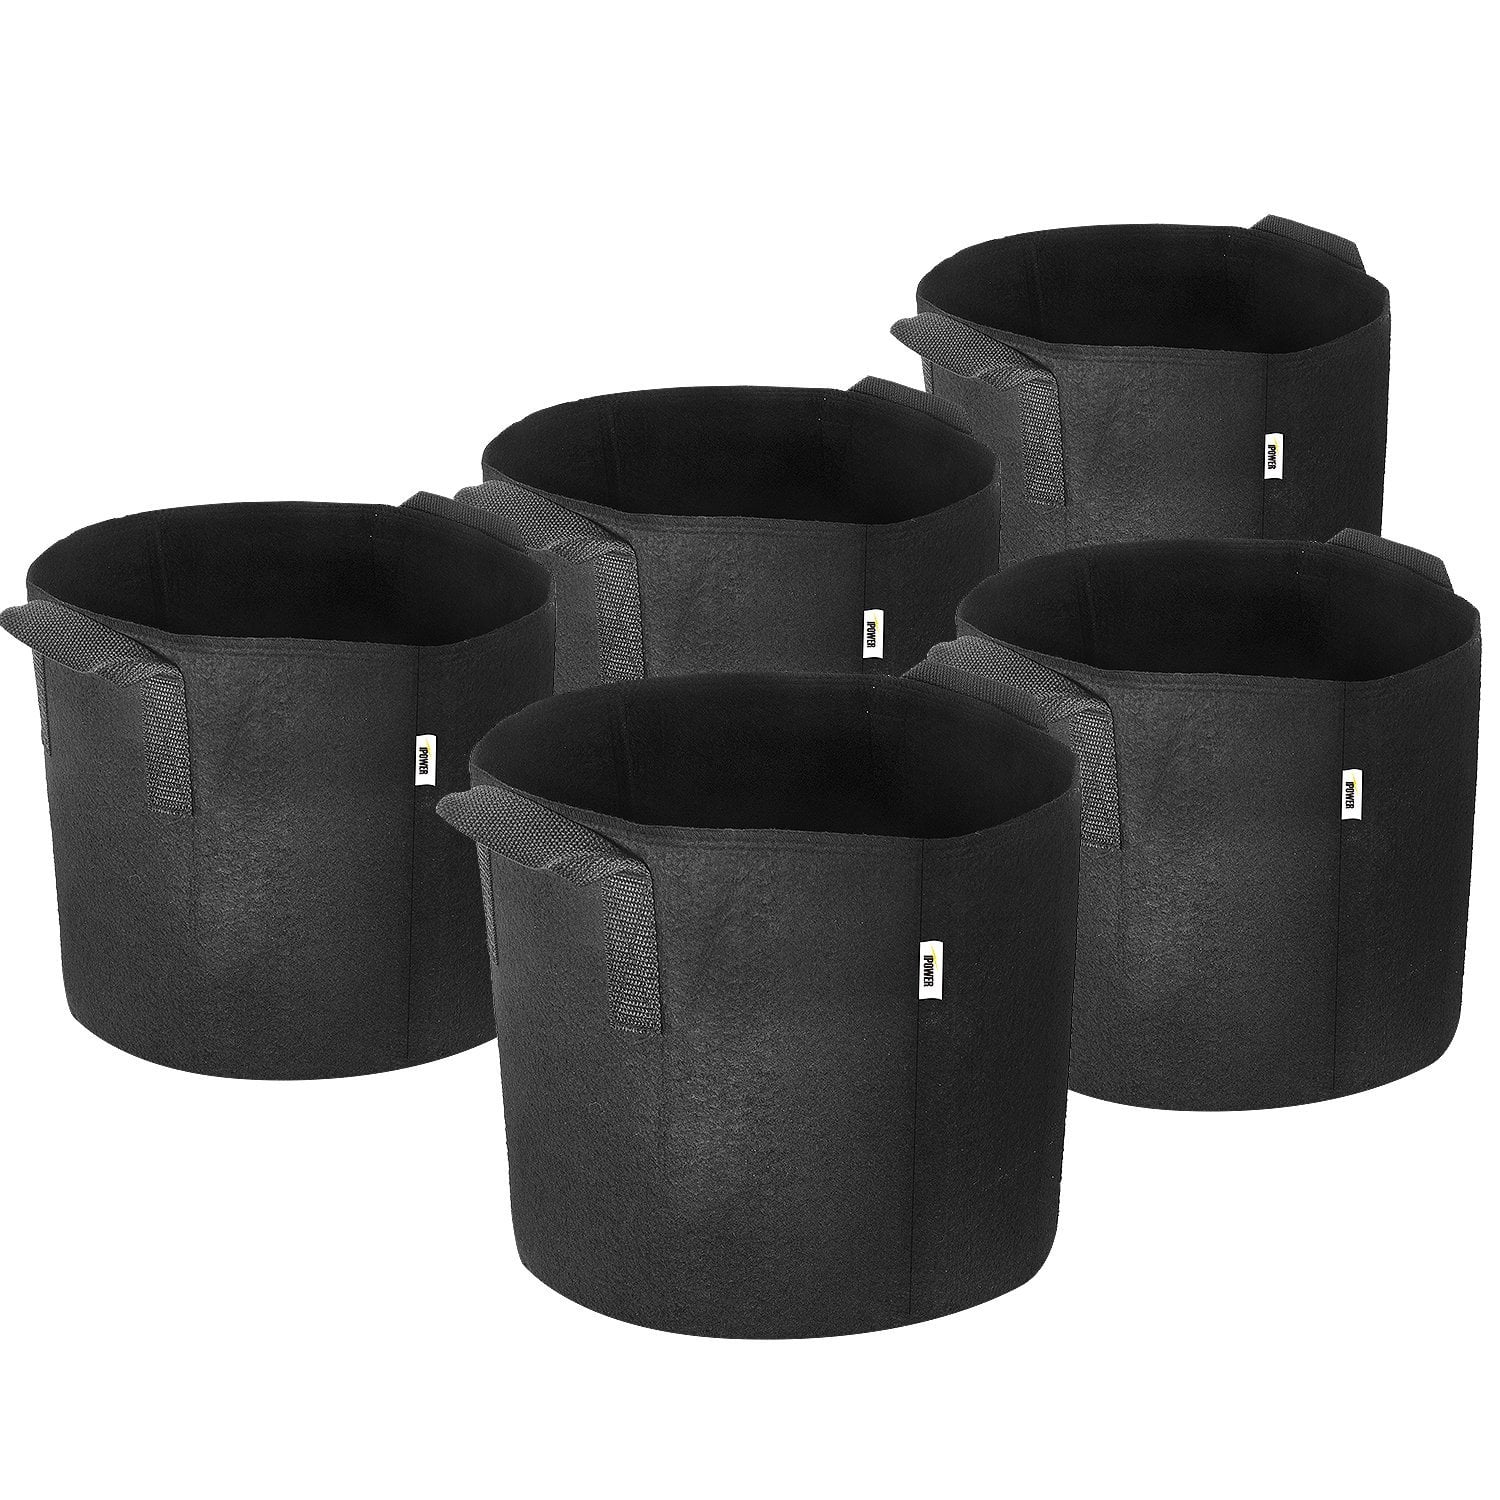 Round Fabric Pots Plant Pouch Root Container Grow Bag Aeration Garden Container 